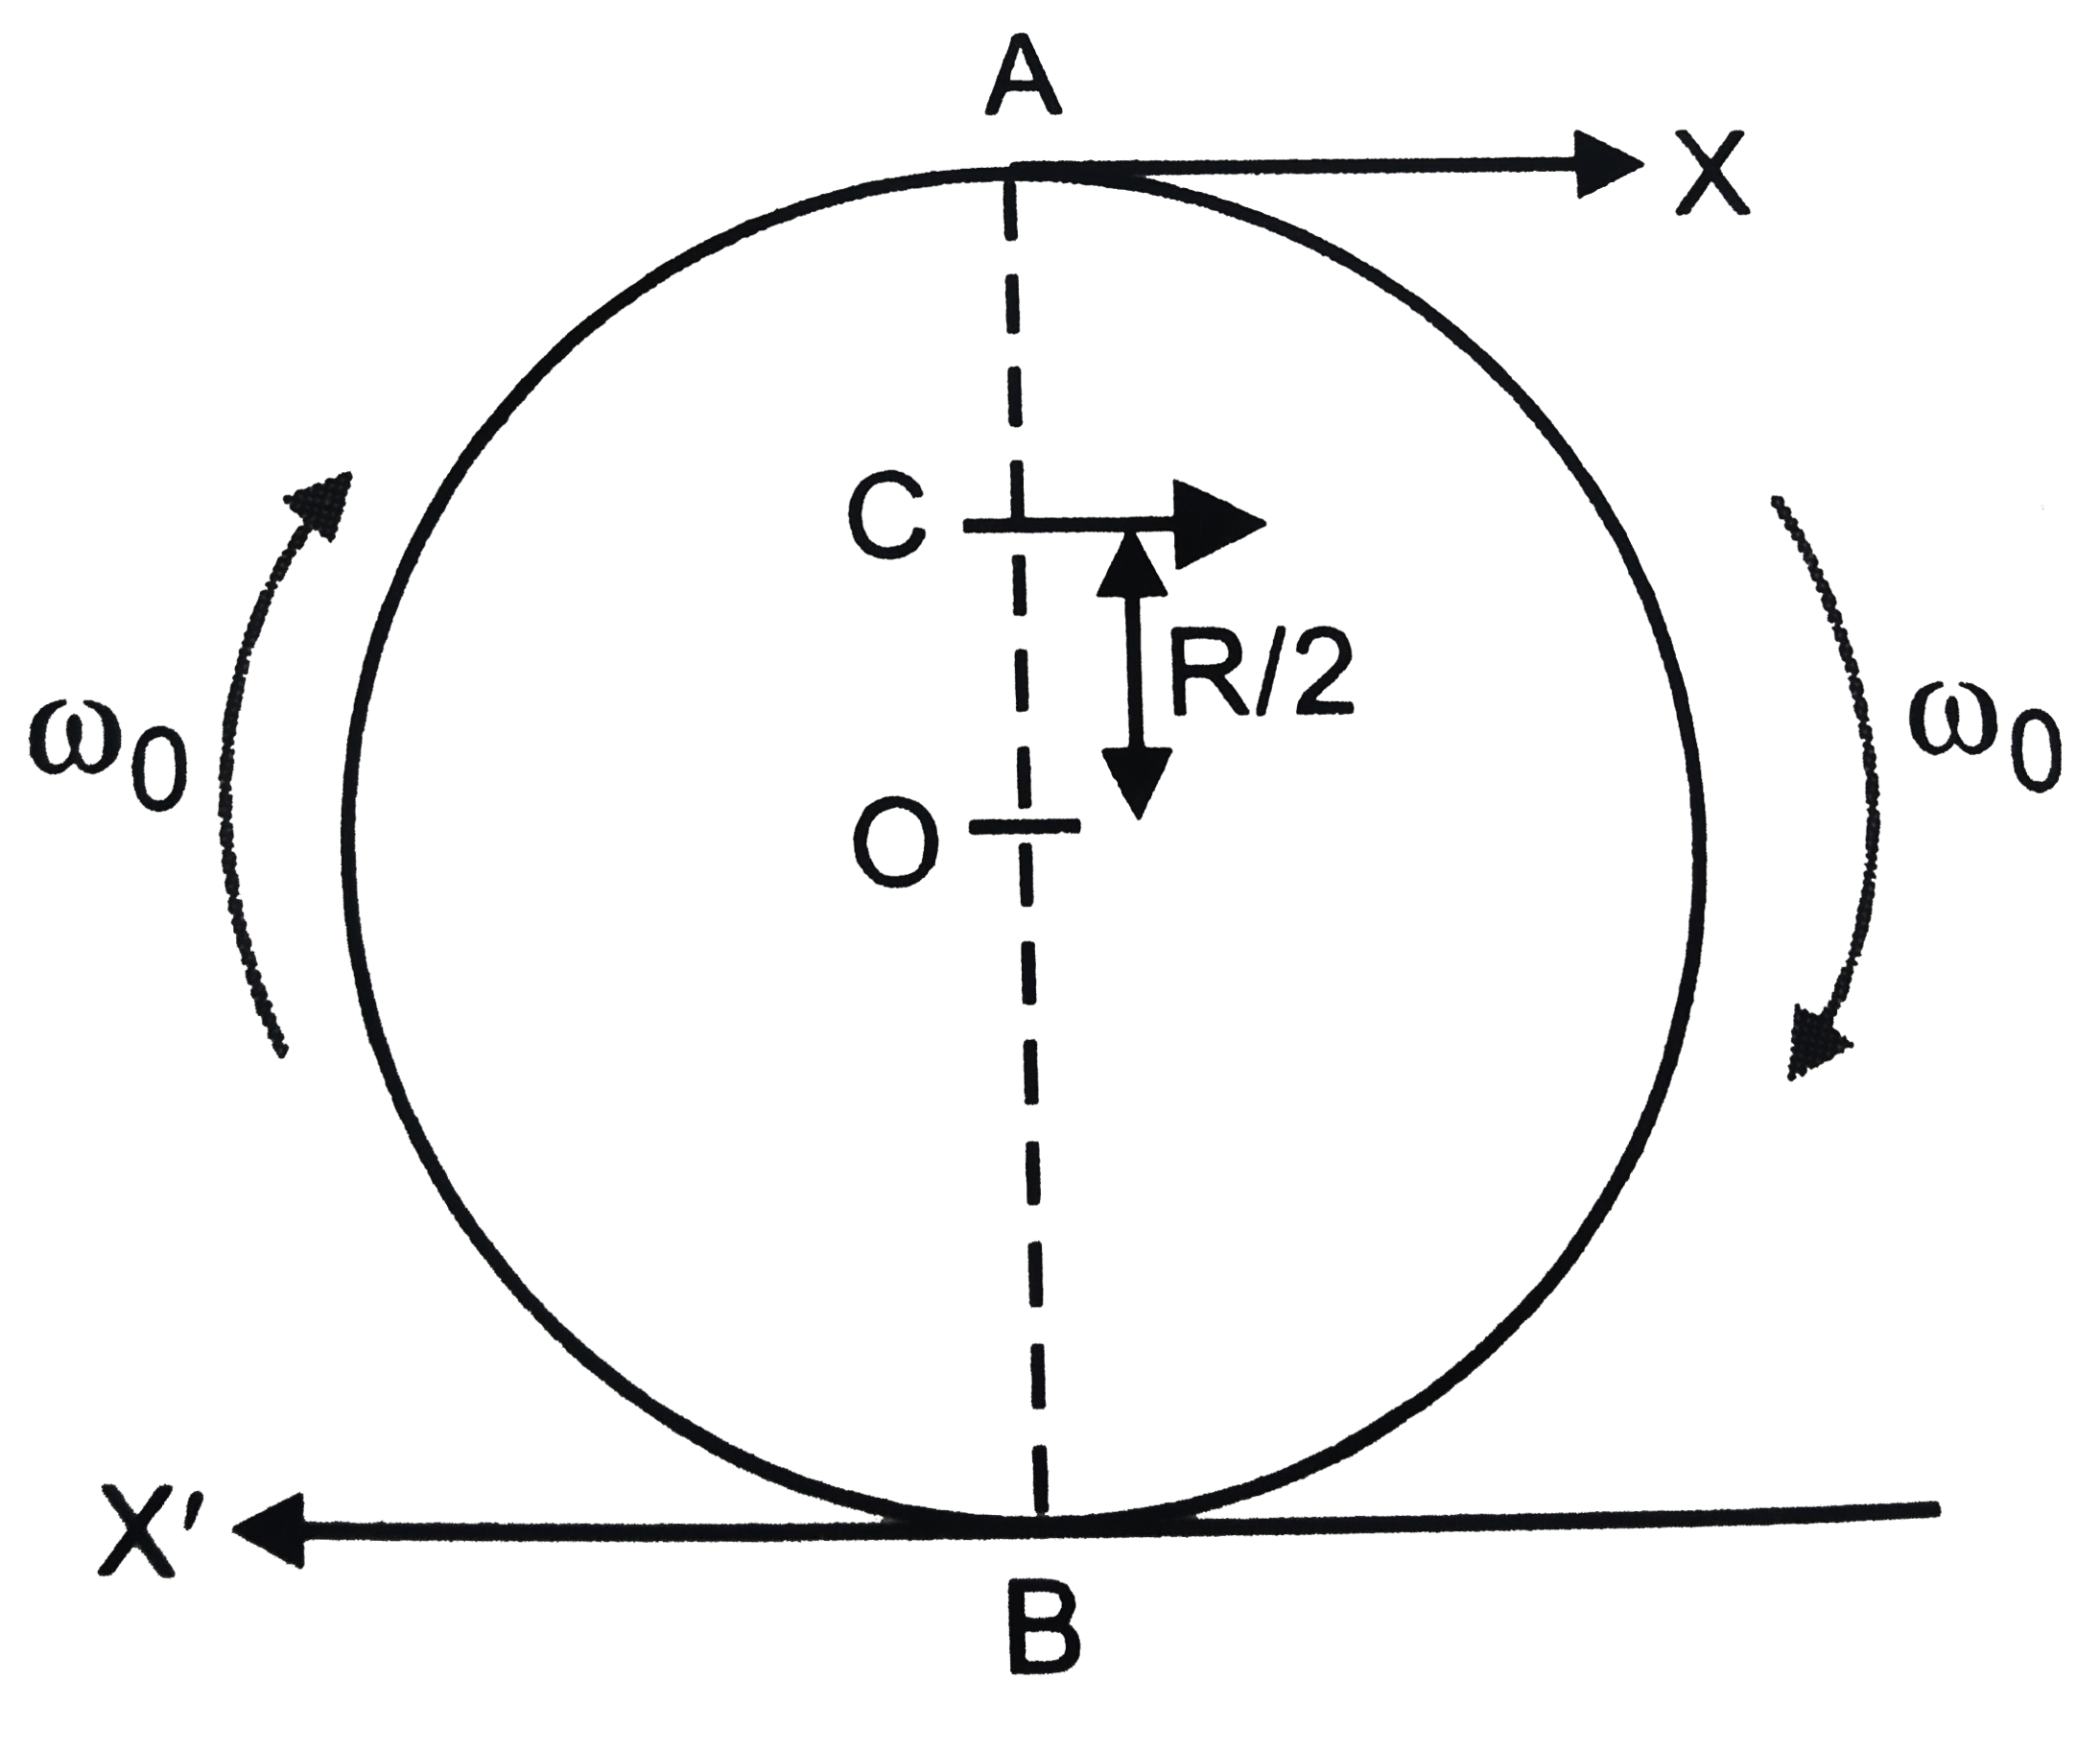 A disc roating about its axis with angular speed omega(0) is placed lightly (without any translational pull) on a perfectly frictionless table. The radius of the disc is R. What are the linear velocities of the points A, B and C on the disc shown in Fig. Will the disc roll in the direction indicated ?